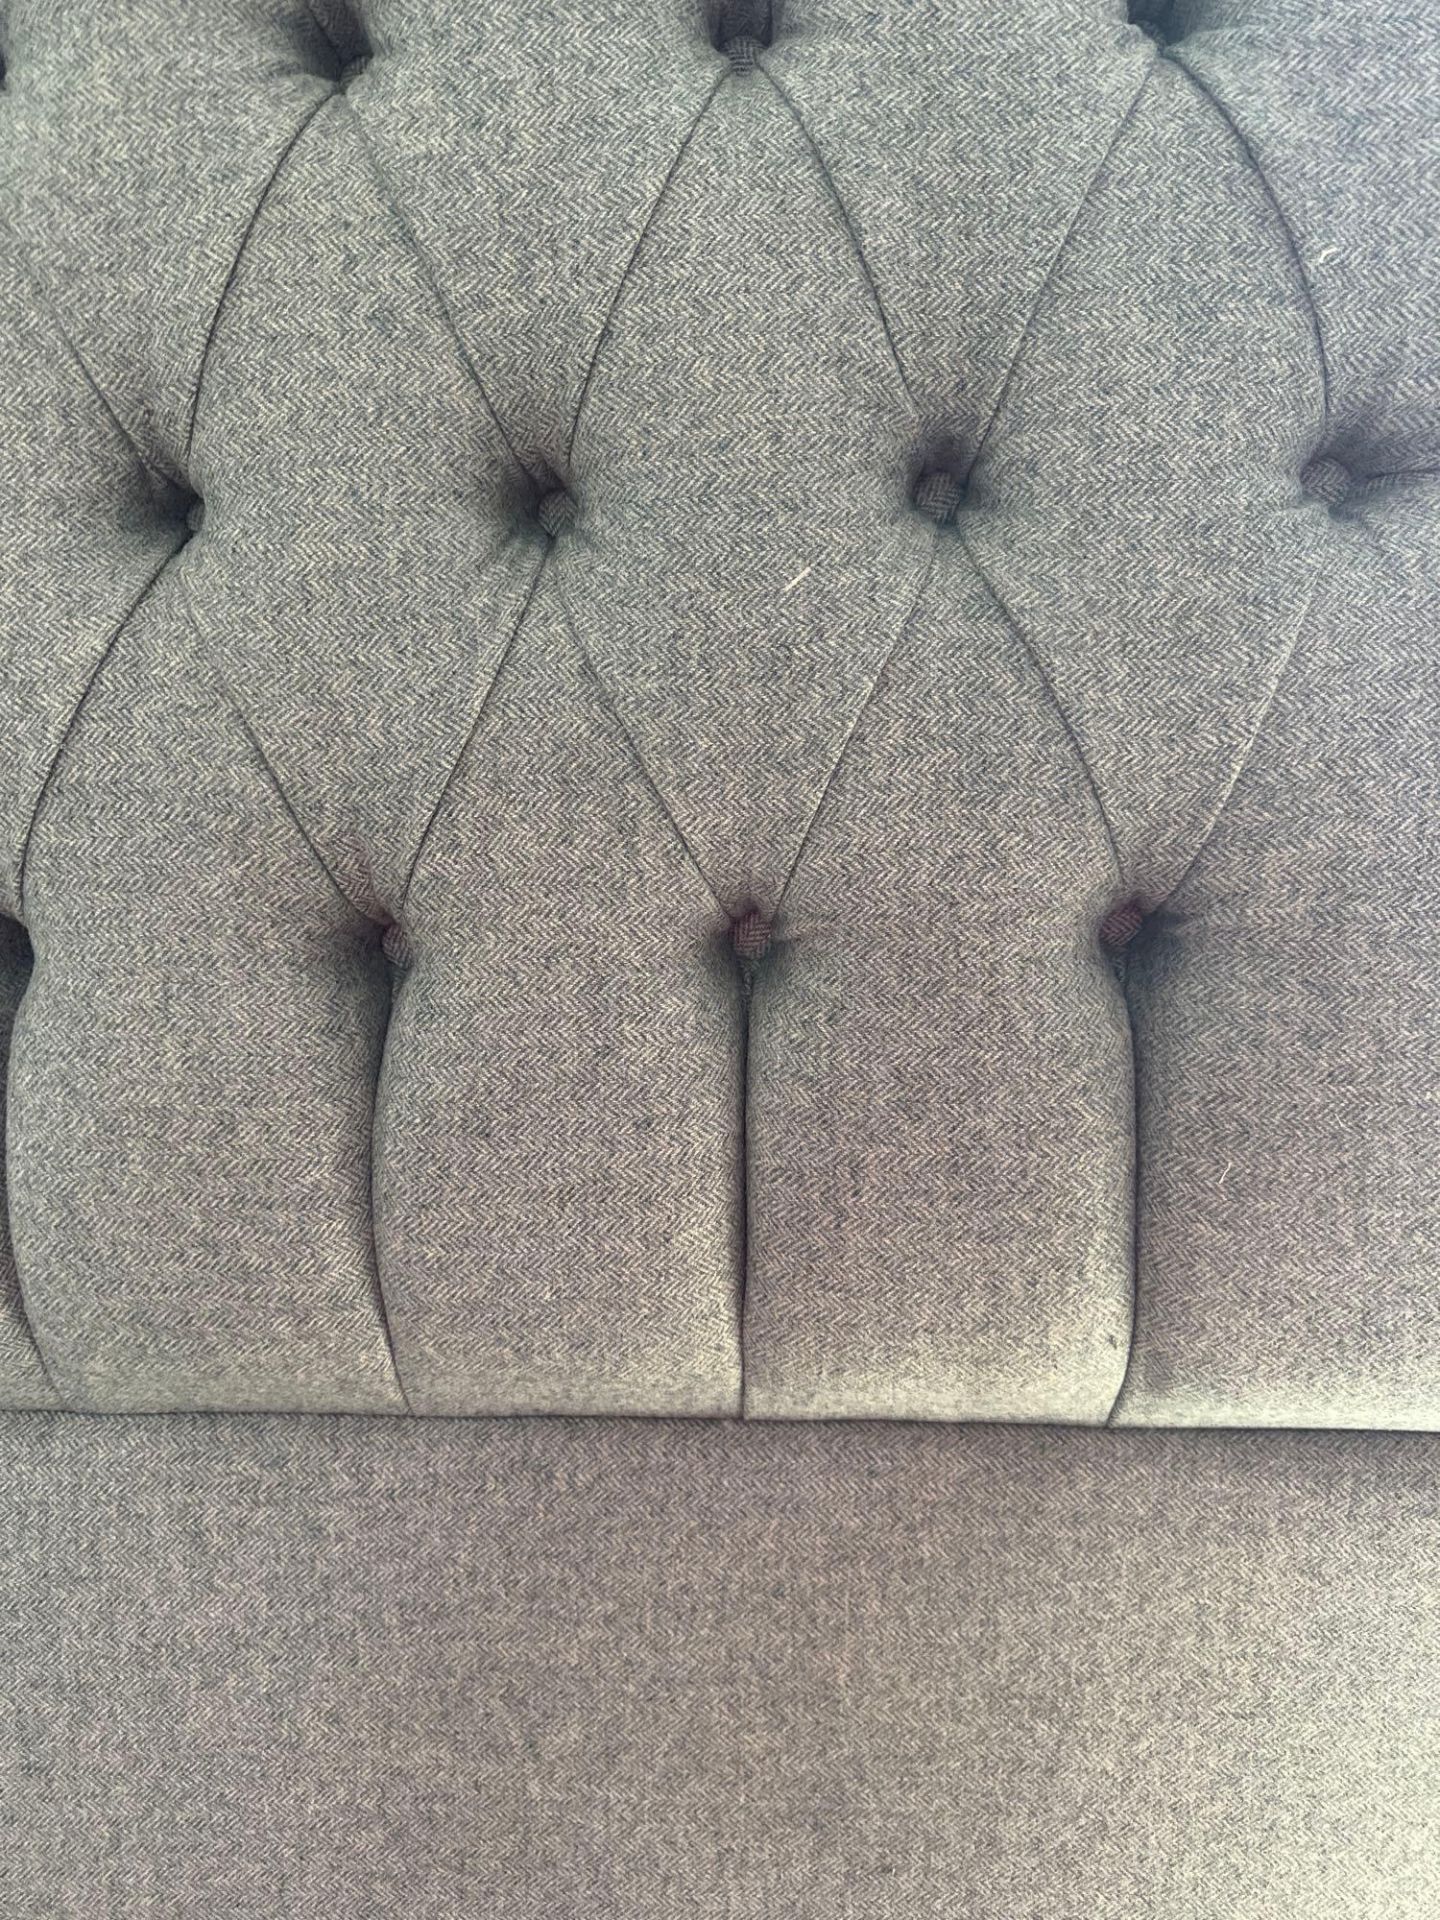 Rectangular Deep Buttoned Headboard, Masterfully Upholstered In The Luxurious Herringbone Wool - Image 2 of 2